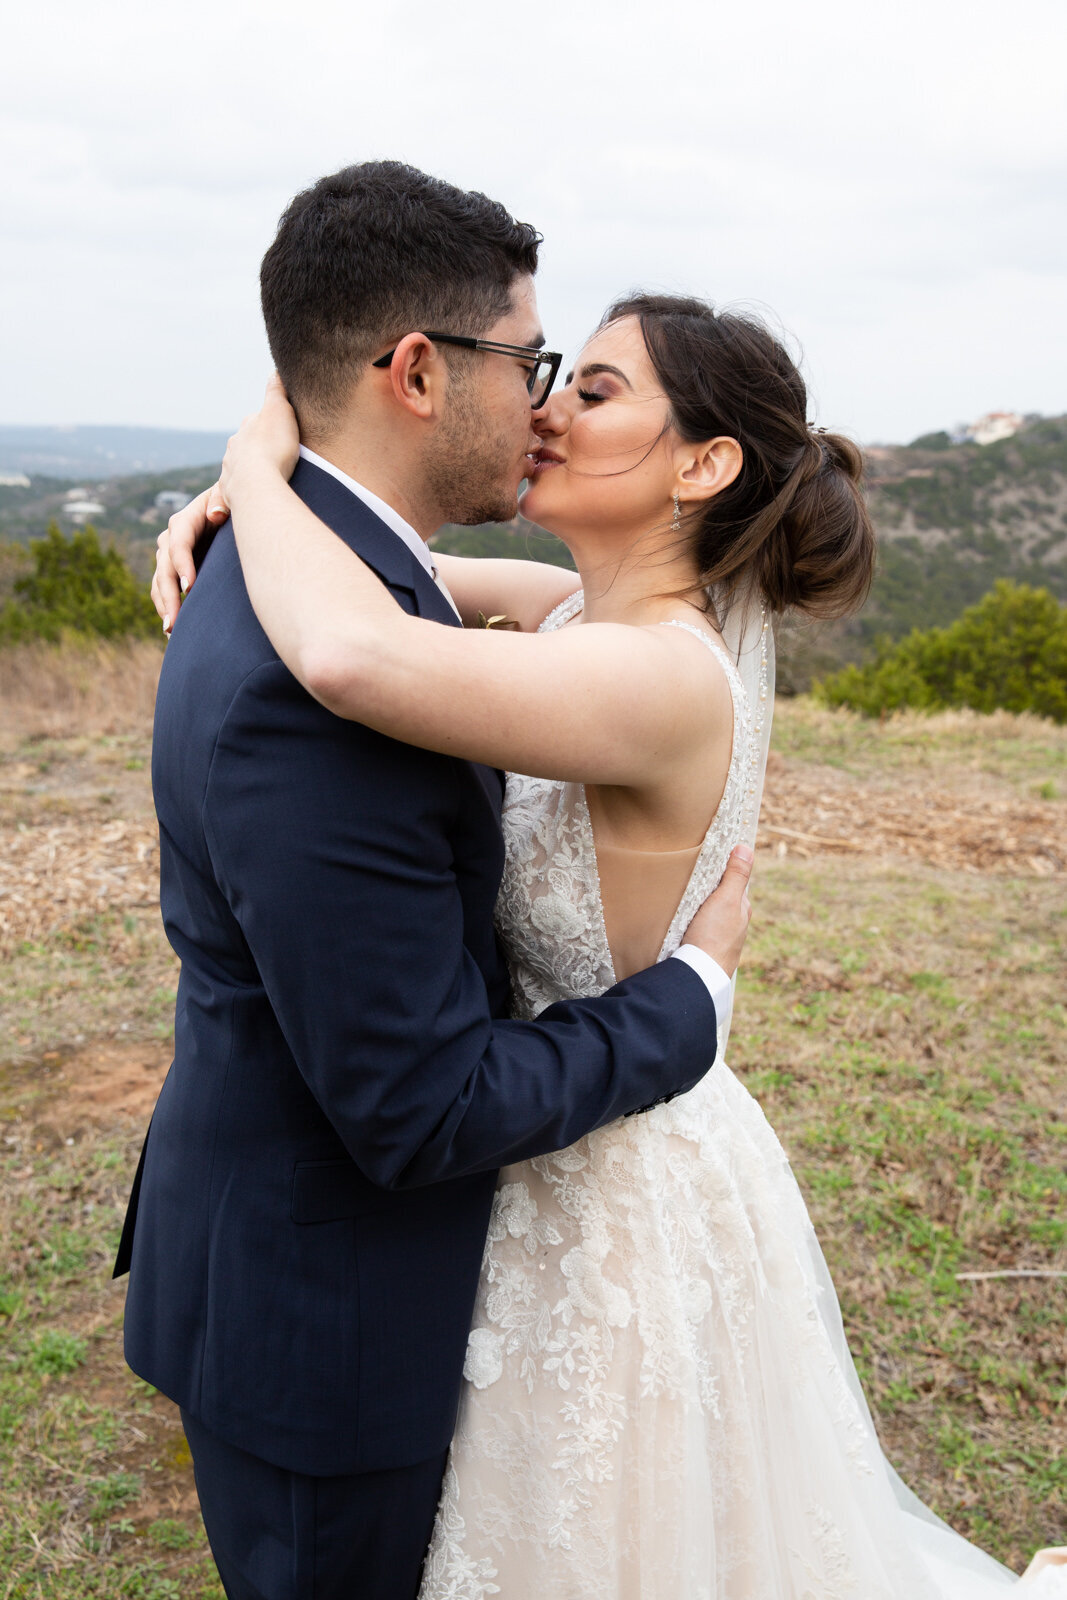 A bride and groom sharing a passionate kiss in a field with majestic mountains as the backdrop, artfully captured by an Austin wedding photographer.